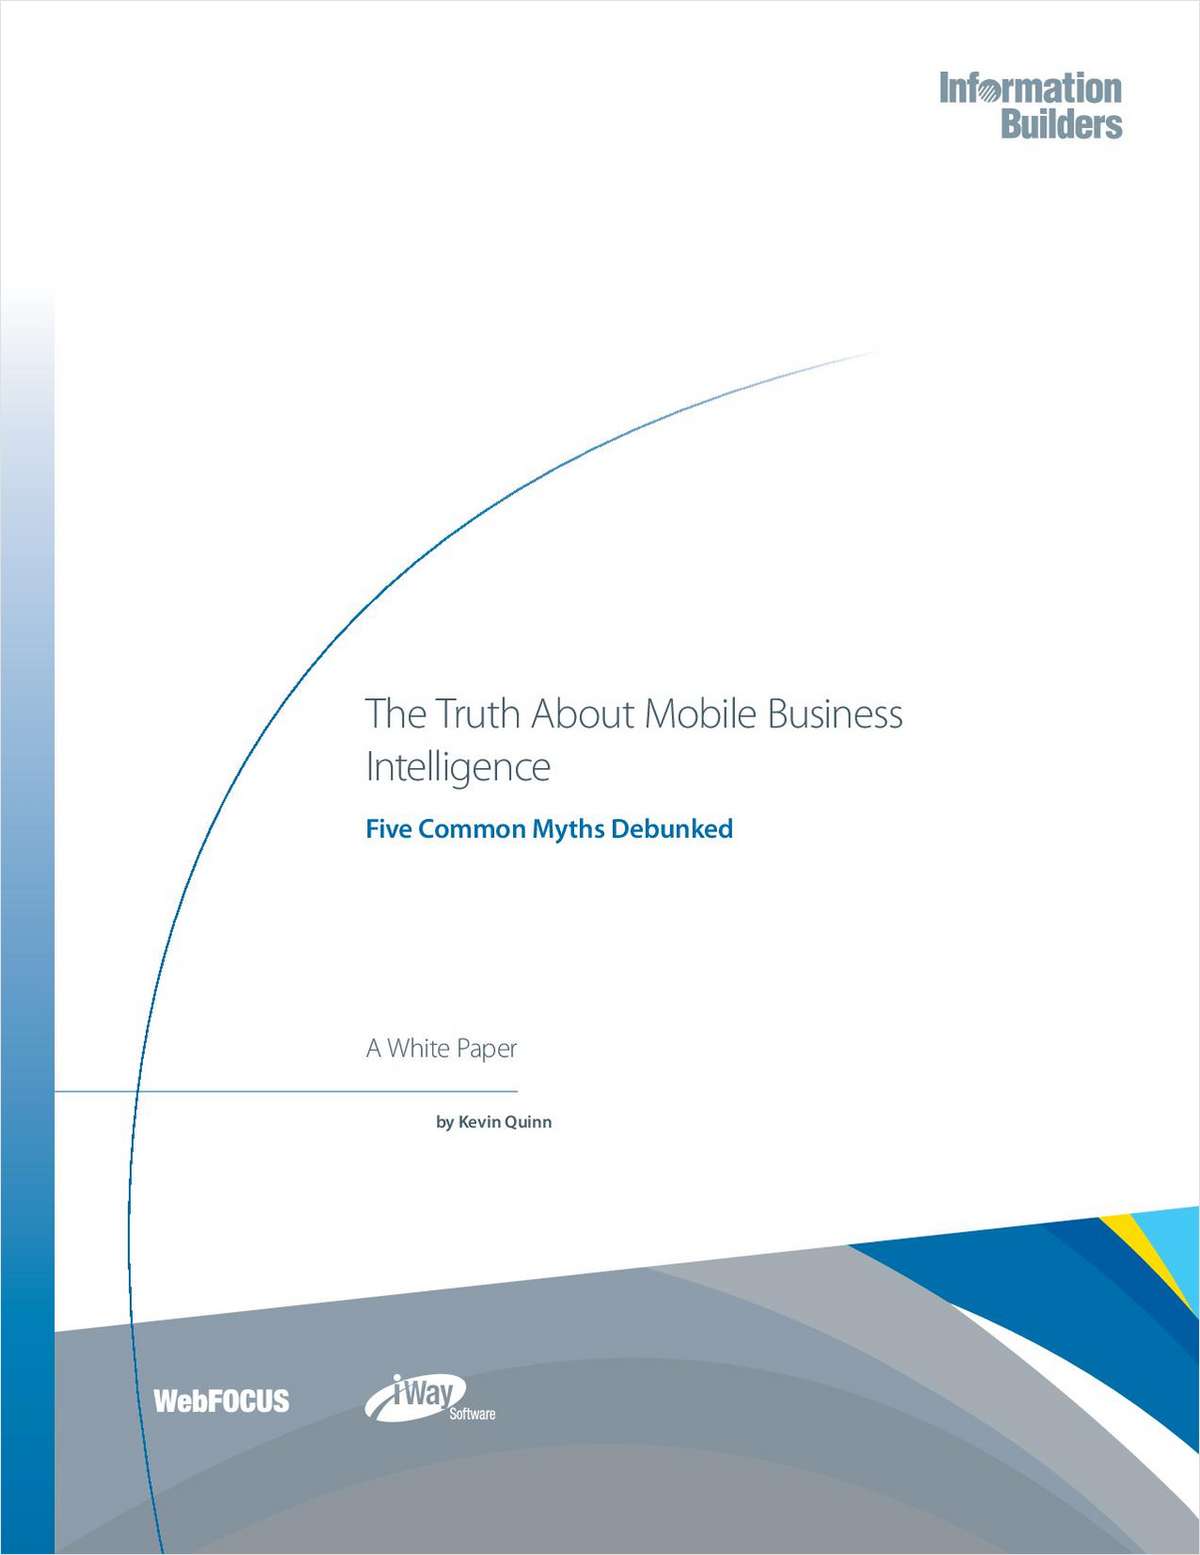 The Truth About Mobile Business Intelligence: Five Common Myths Debunked